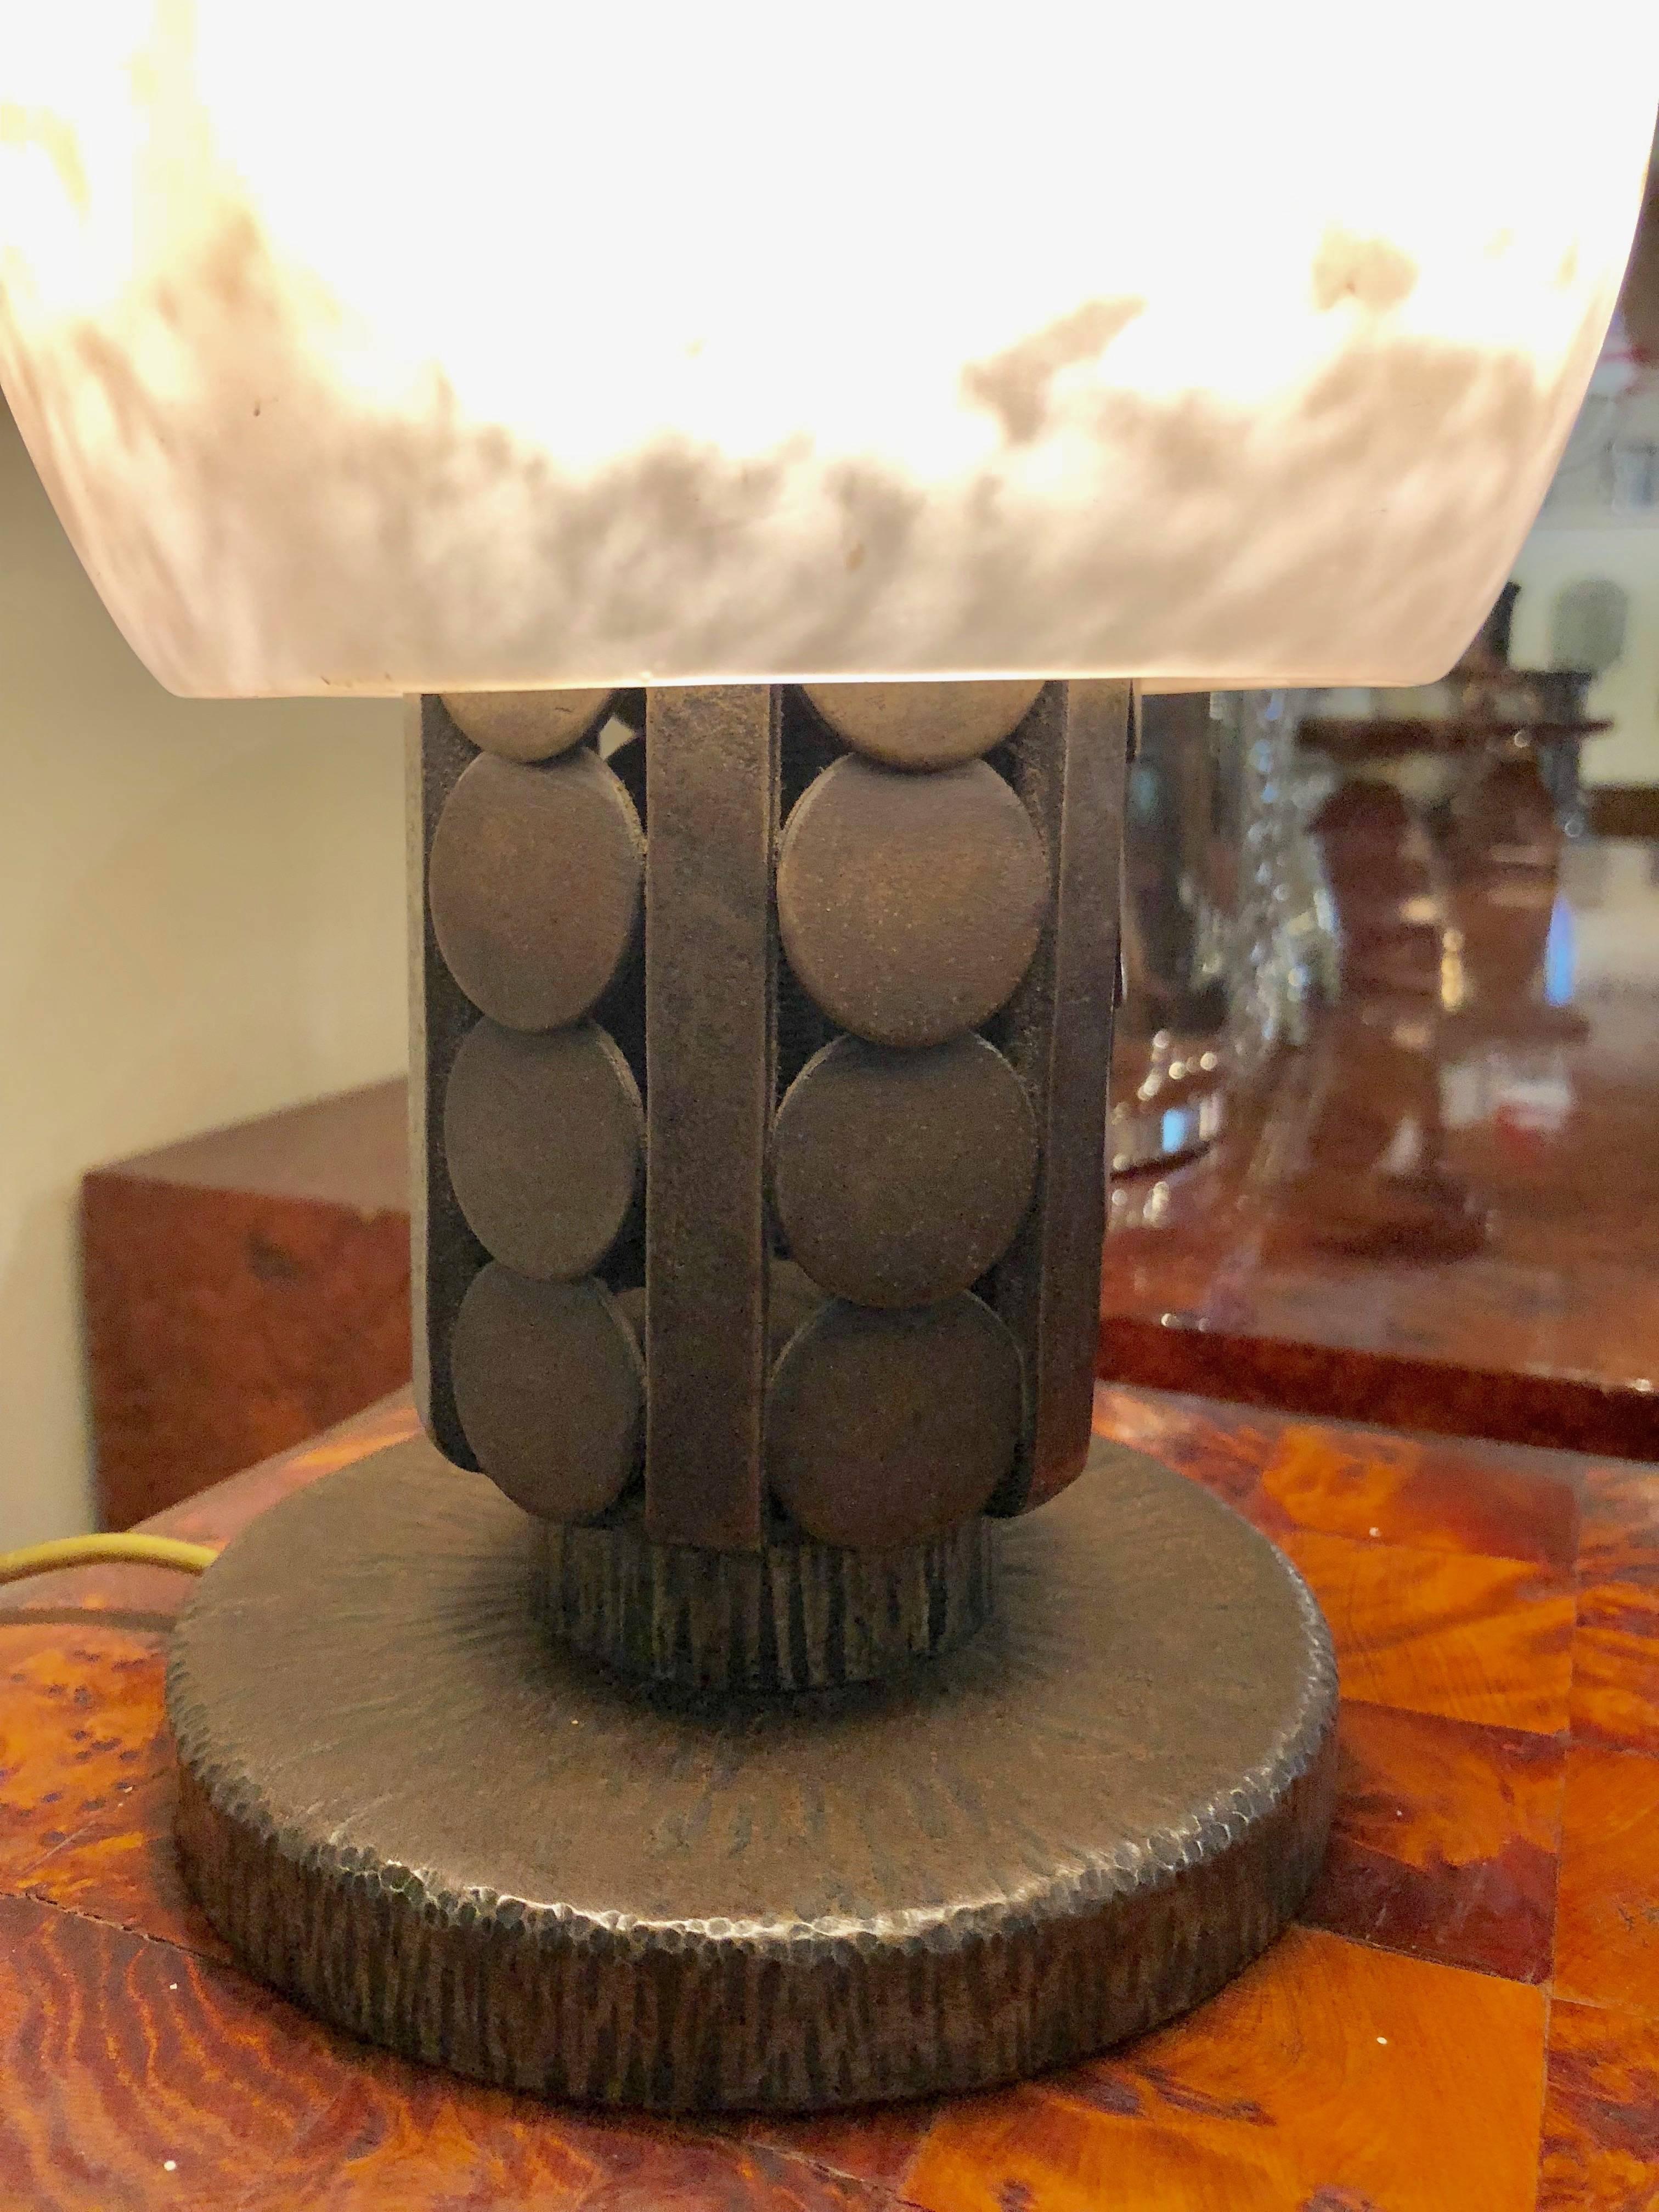 Exceptional and rare Art Deco iron table lamp. French fer forge of the highest quality. Contemporary of Edgar Brandt, Raymond Subes and Paul Kiss, this iron lamp signed on the base by designer Katona. Great looking with a mushroom style spotted